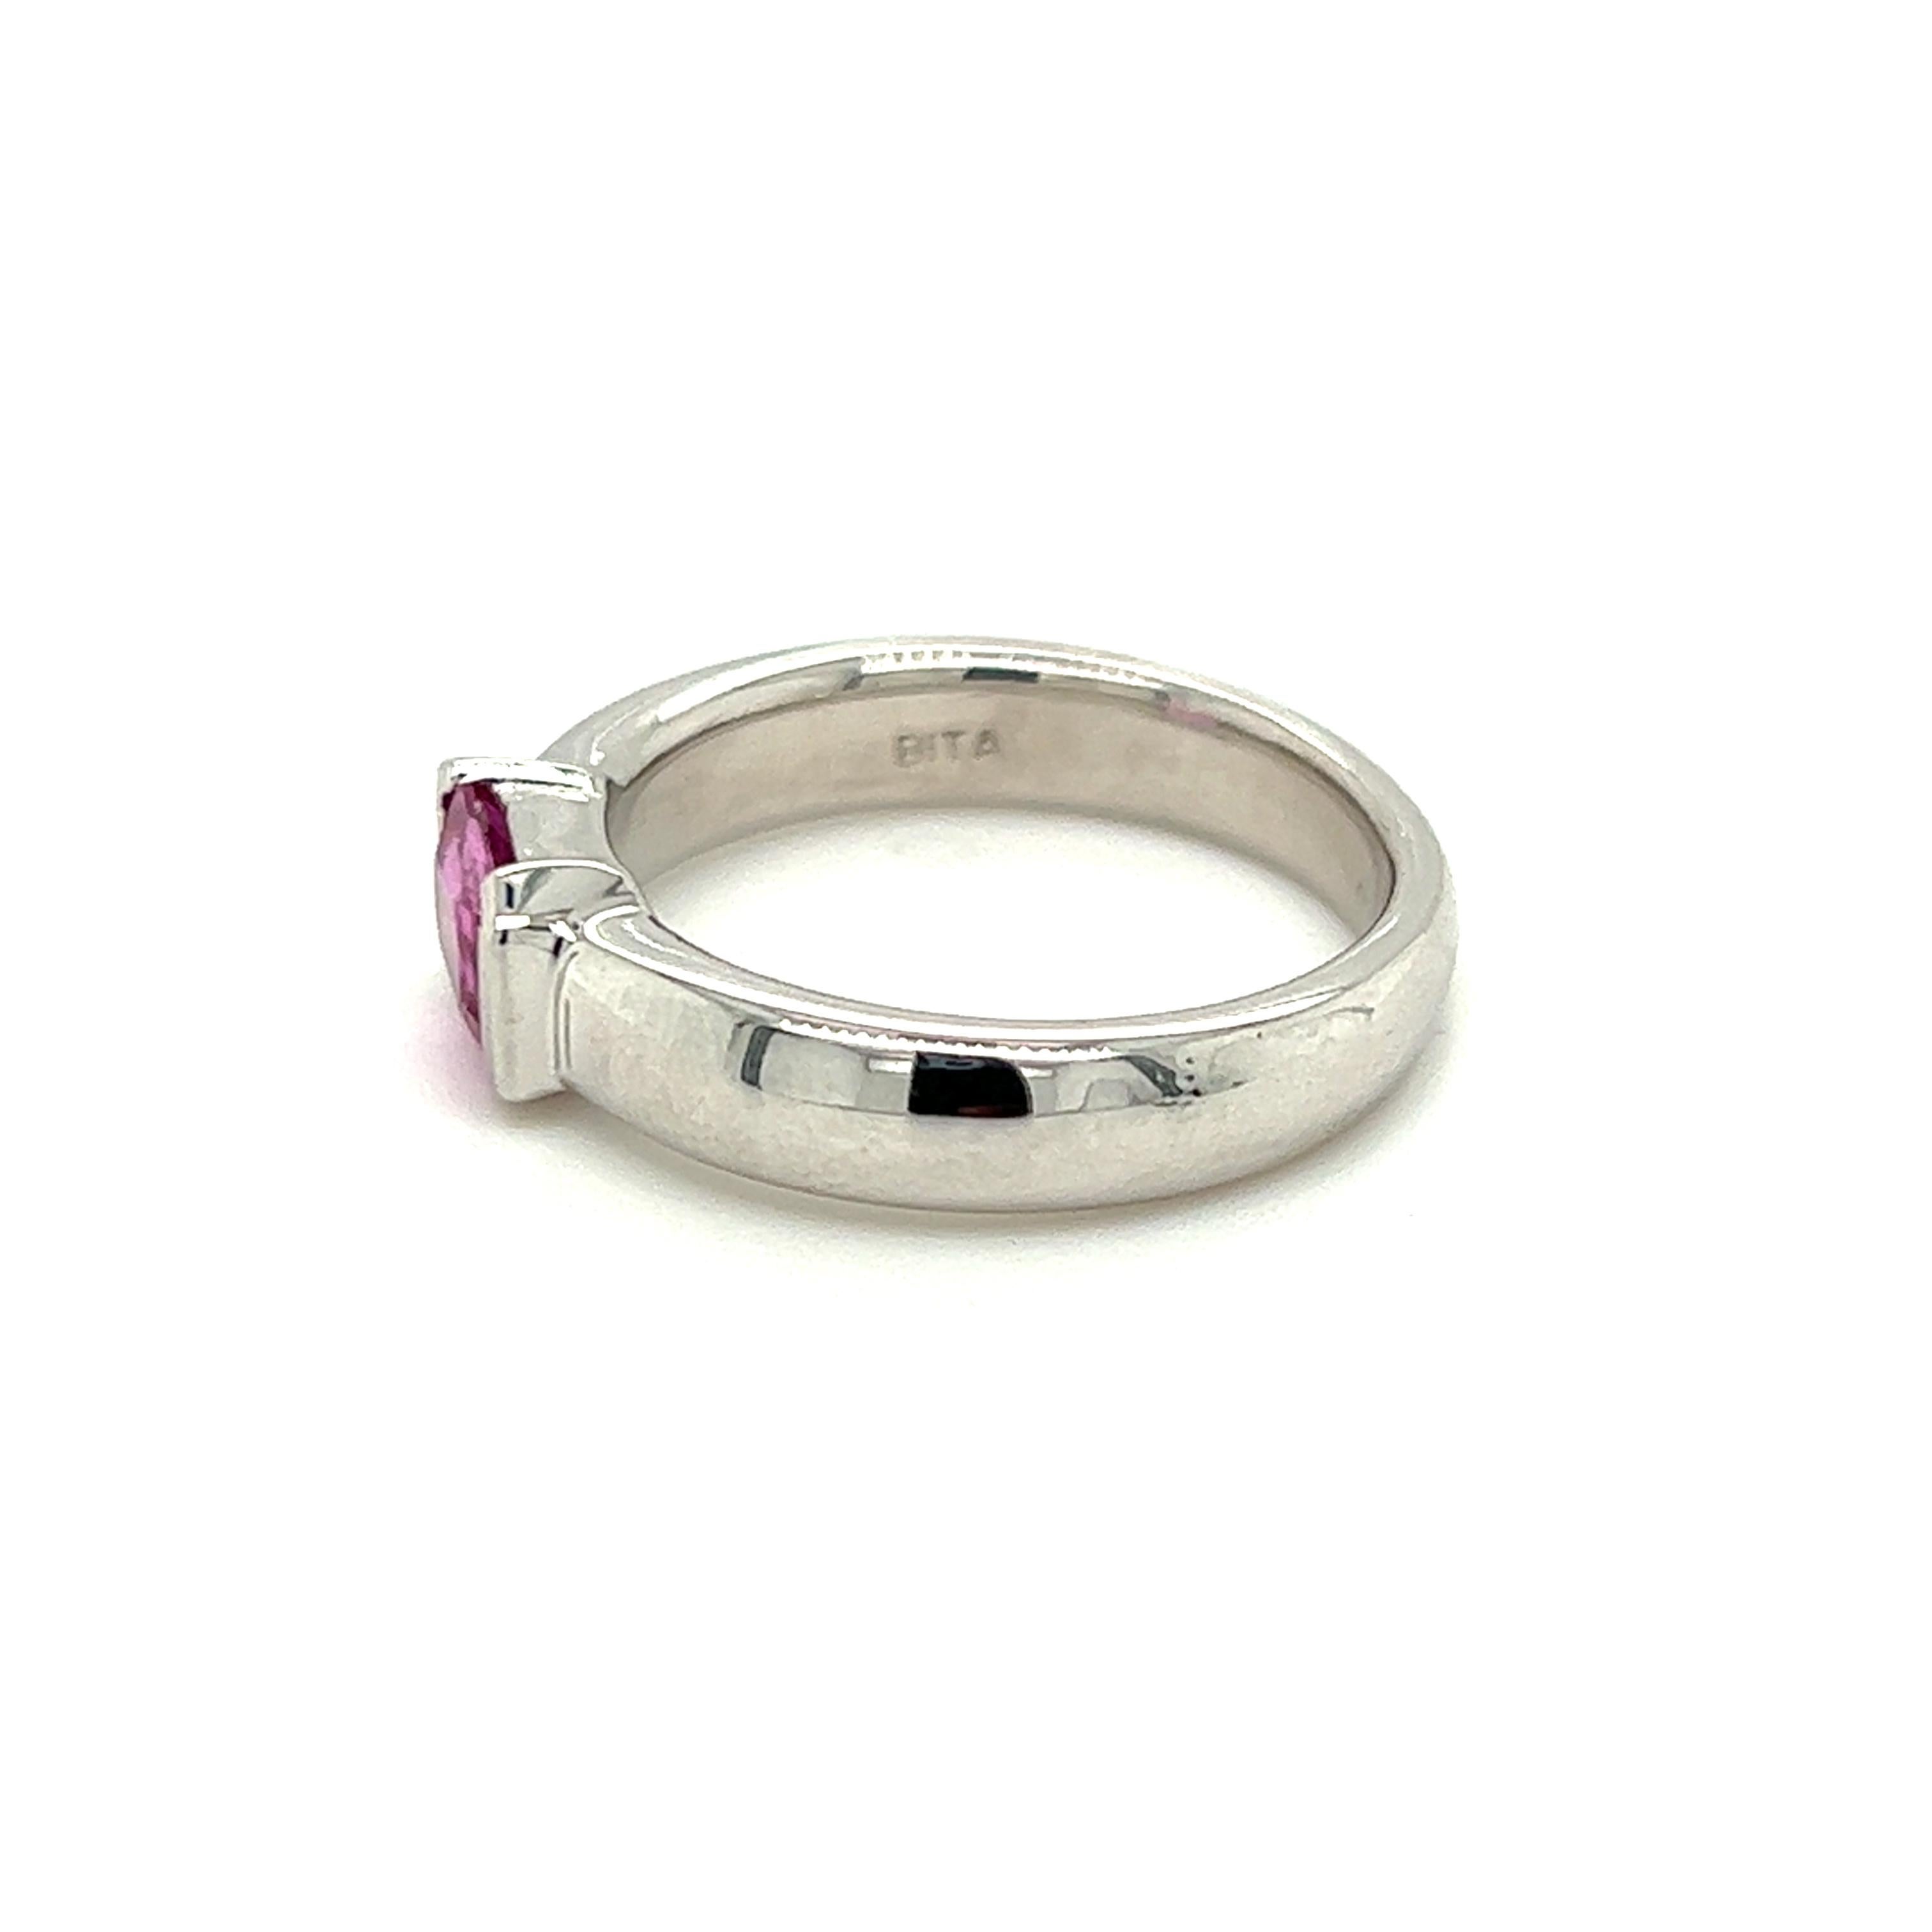 One 14-karat white gold ring, designed by Bita for EFFY,  measuring 4.30mm wide, set with one natural emerald cut pink sapphire measuring approximately 7x5mm. The ring is a finger size 7 and is resizable.  